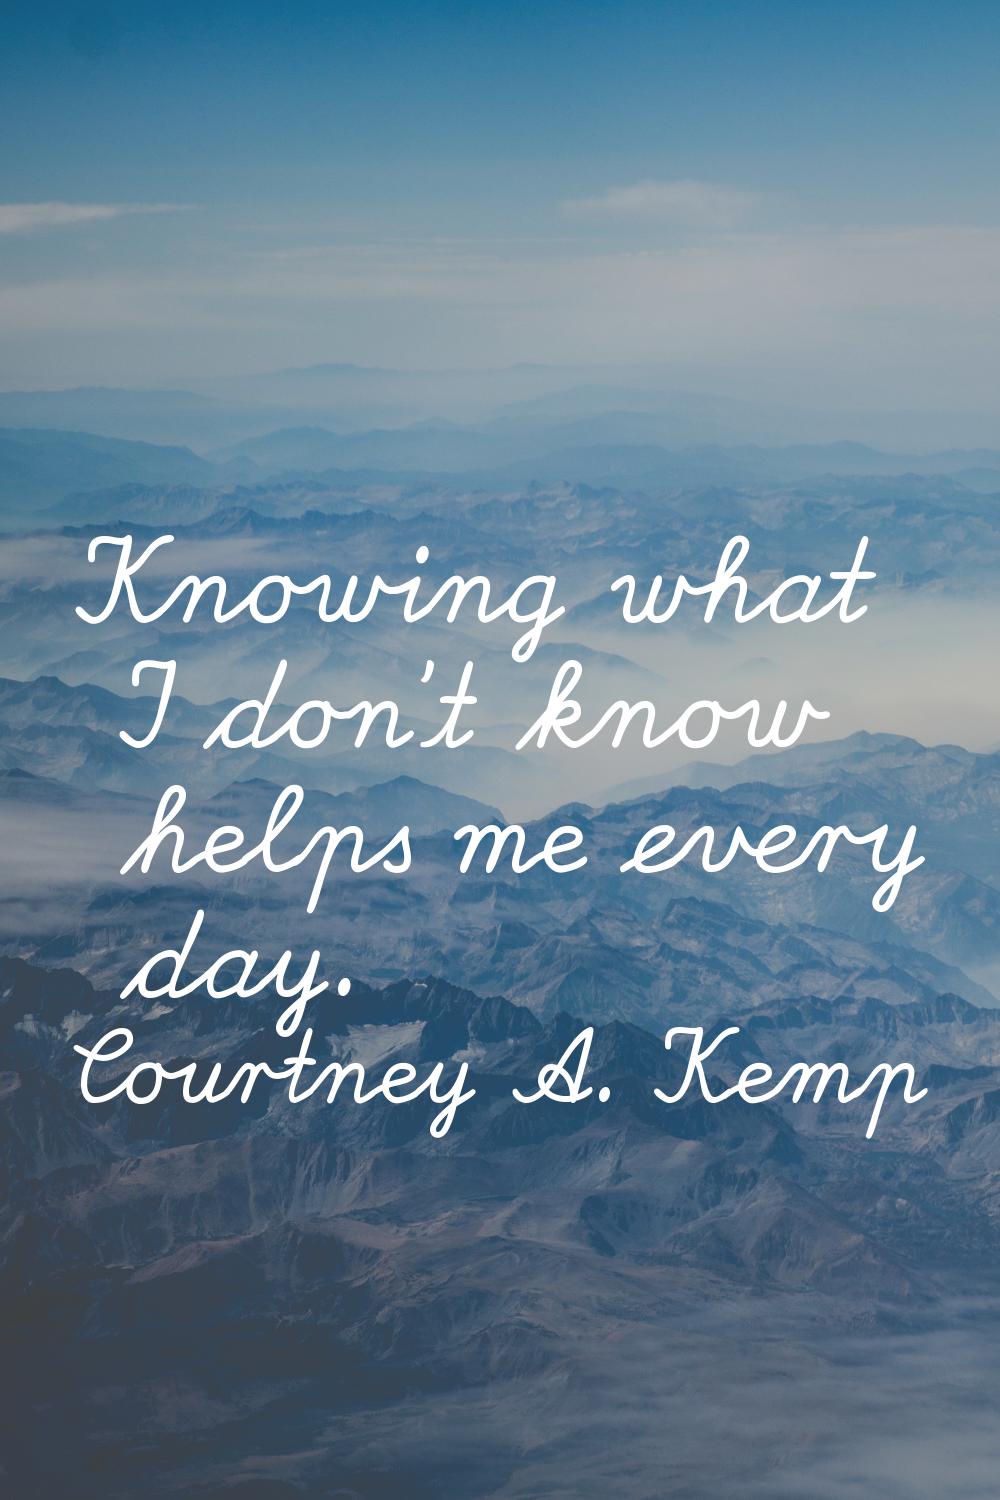 Knowing what I don't know helps me every day.